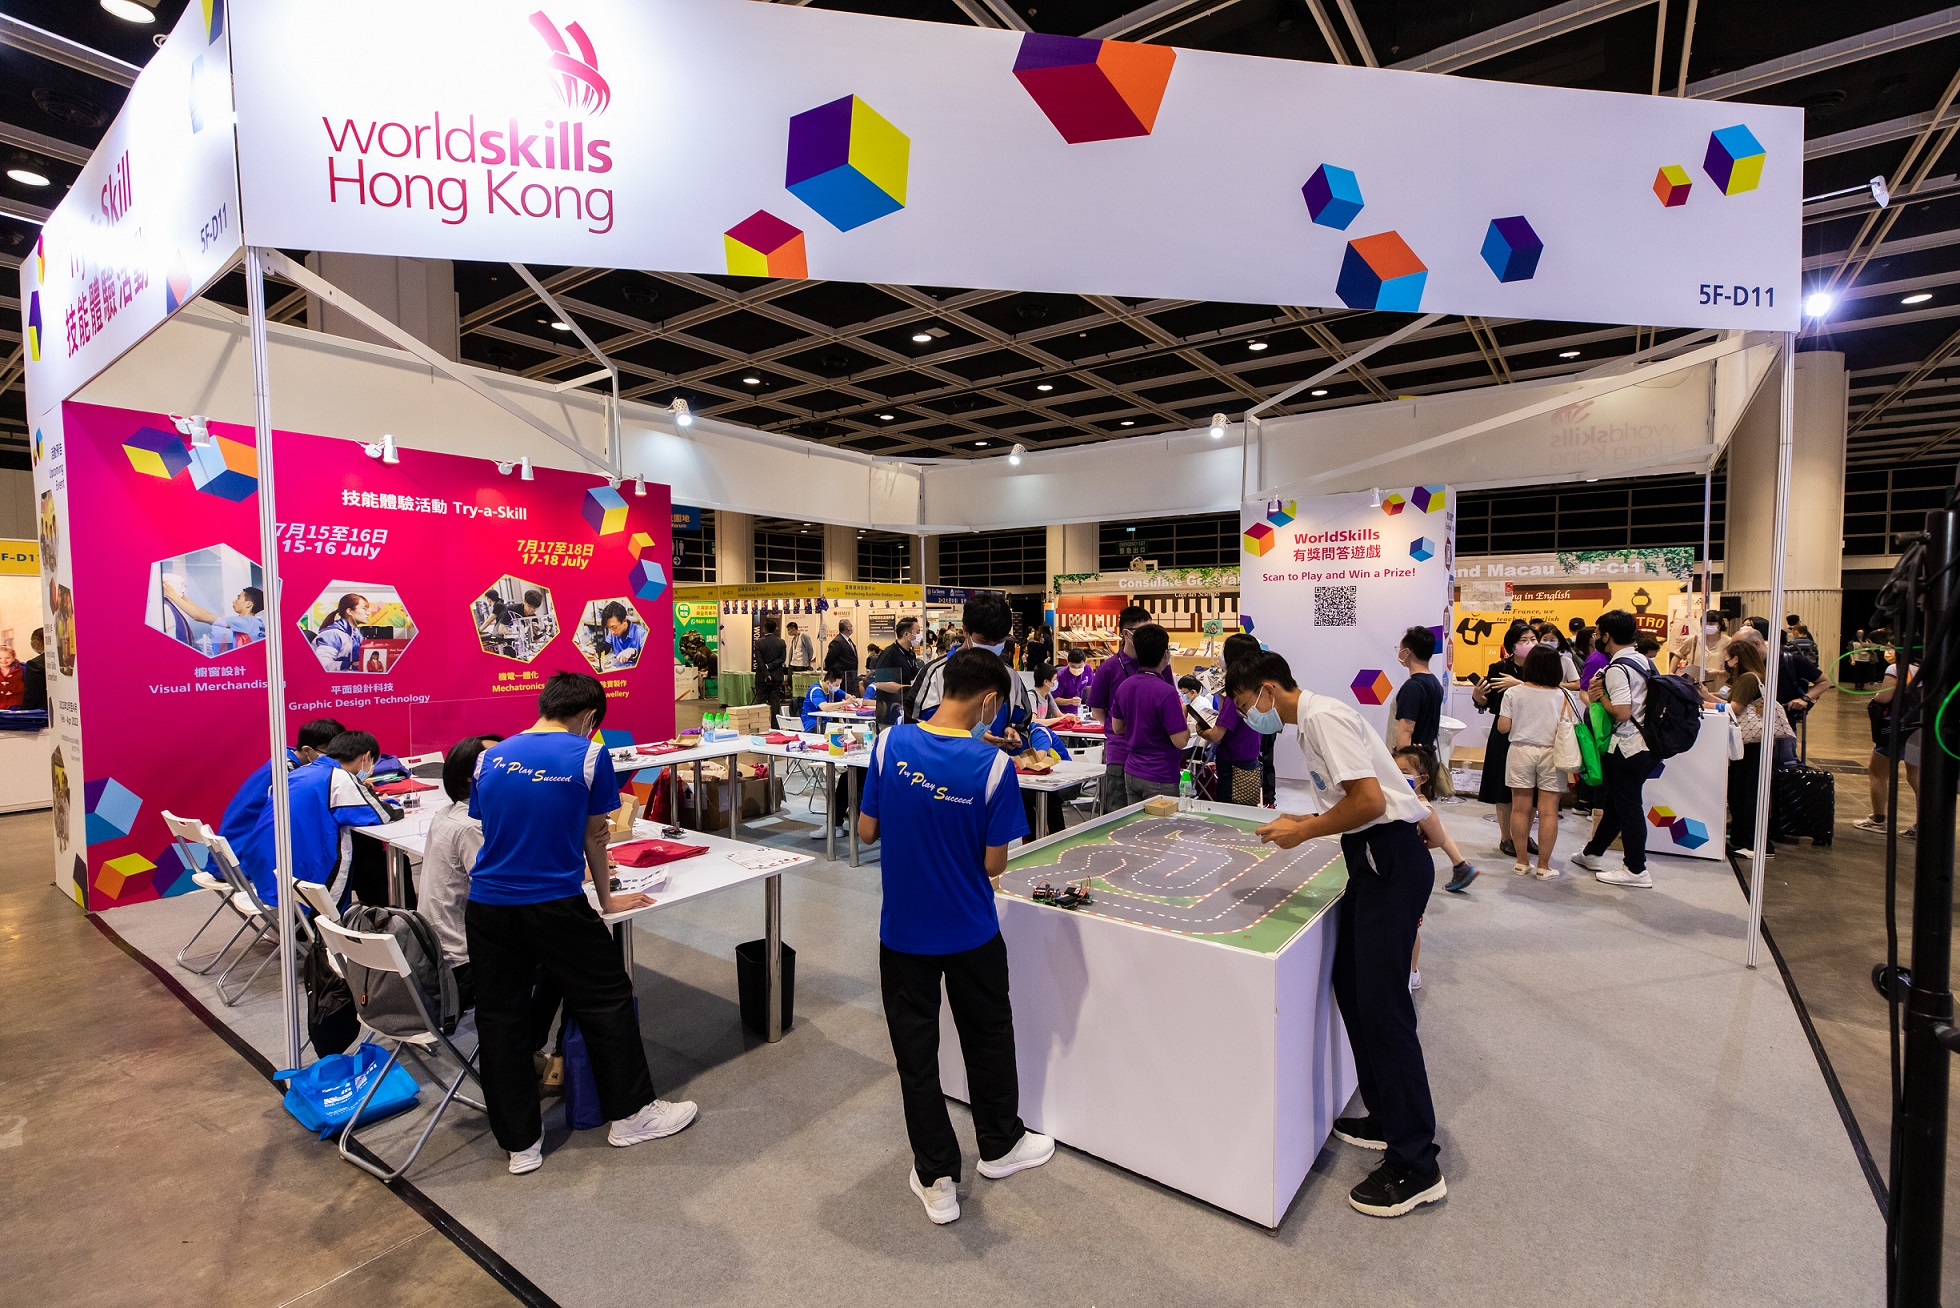 To showcase the achievements of young local skills talents over these 25 years, a WorldSkills Hong Kong Showcase will be held at the VTC Future Skills Community Event during 9 to 11 December at Hong Kong Convention and Exhibition Centre. Competitors and experts will gather to share their invaluable experience from the competition.